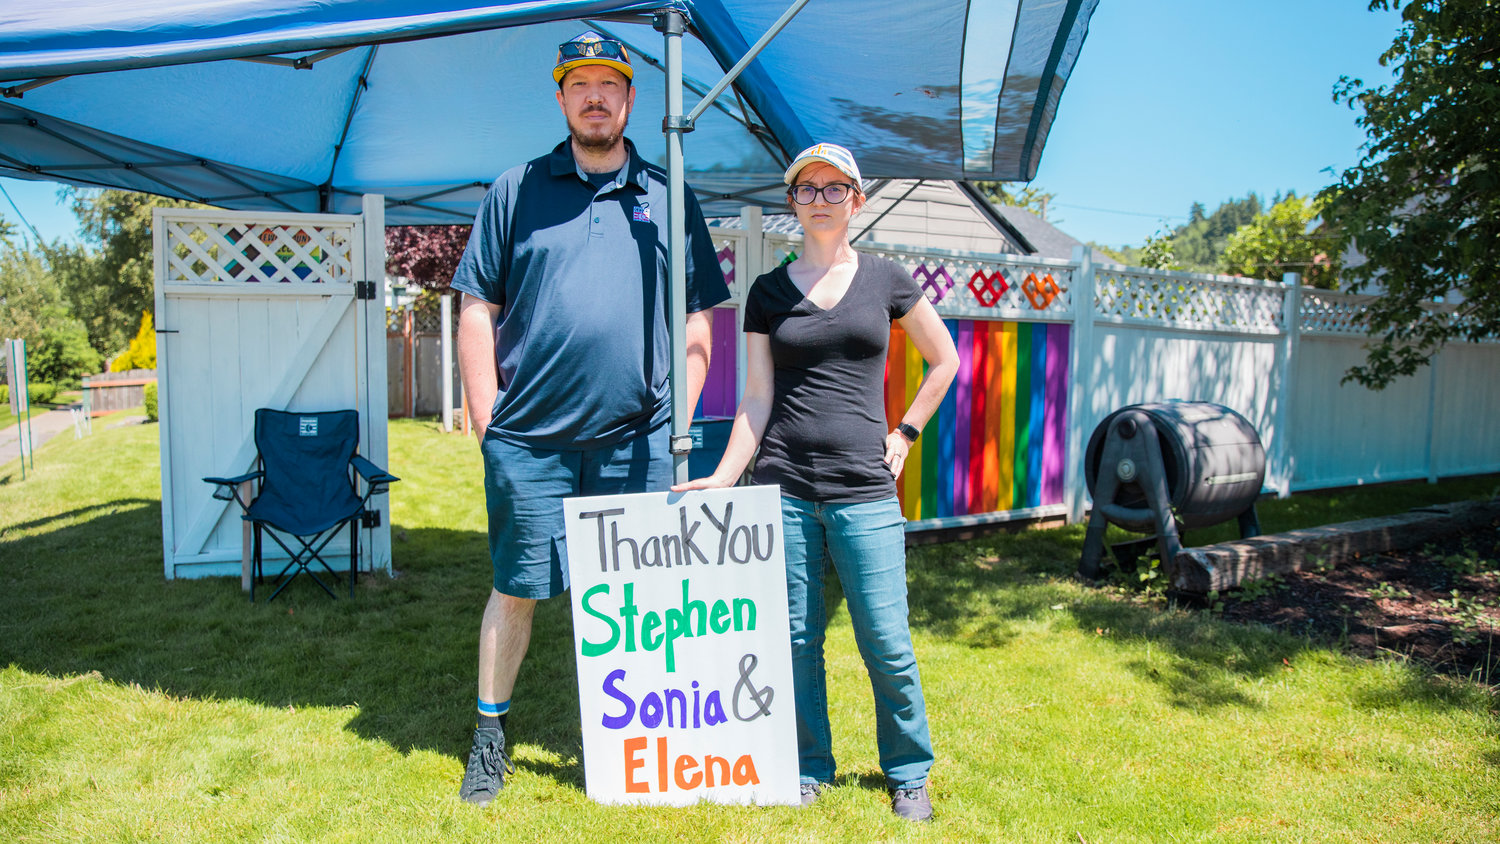 Mike and Jacky Vance pose for a photo next to a sign that reads “Thank you Stephen, Sonia & Elena” in front of the Chehalis Friendship Fence on Friday. The sign acknowledges the three justices who did not want to overrule Roe. v. Wade.